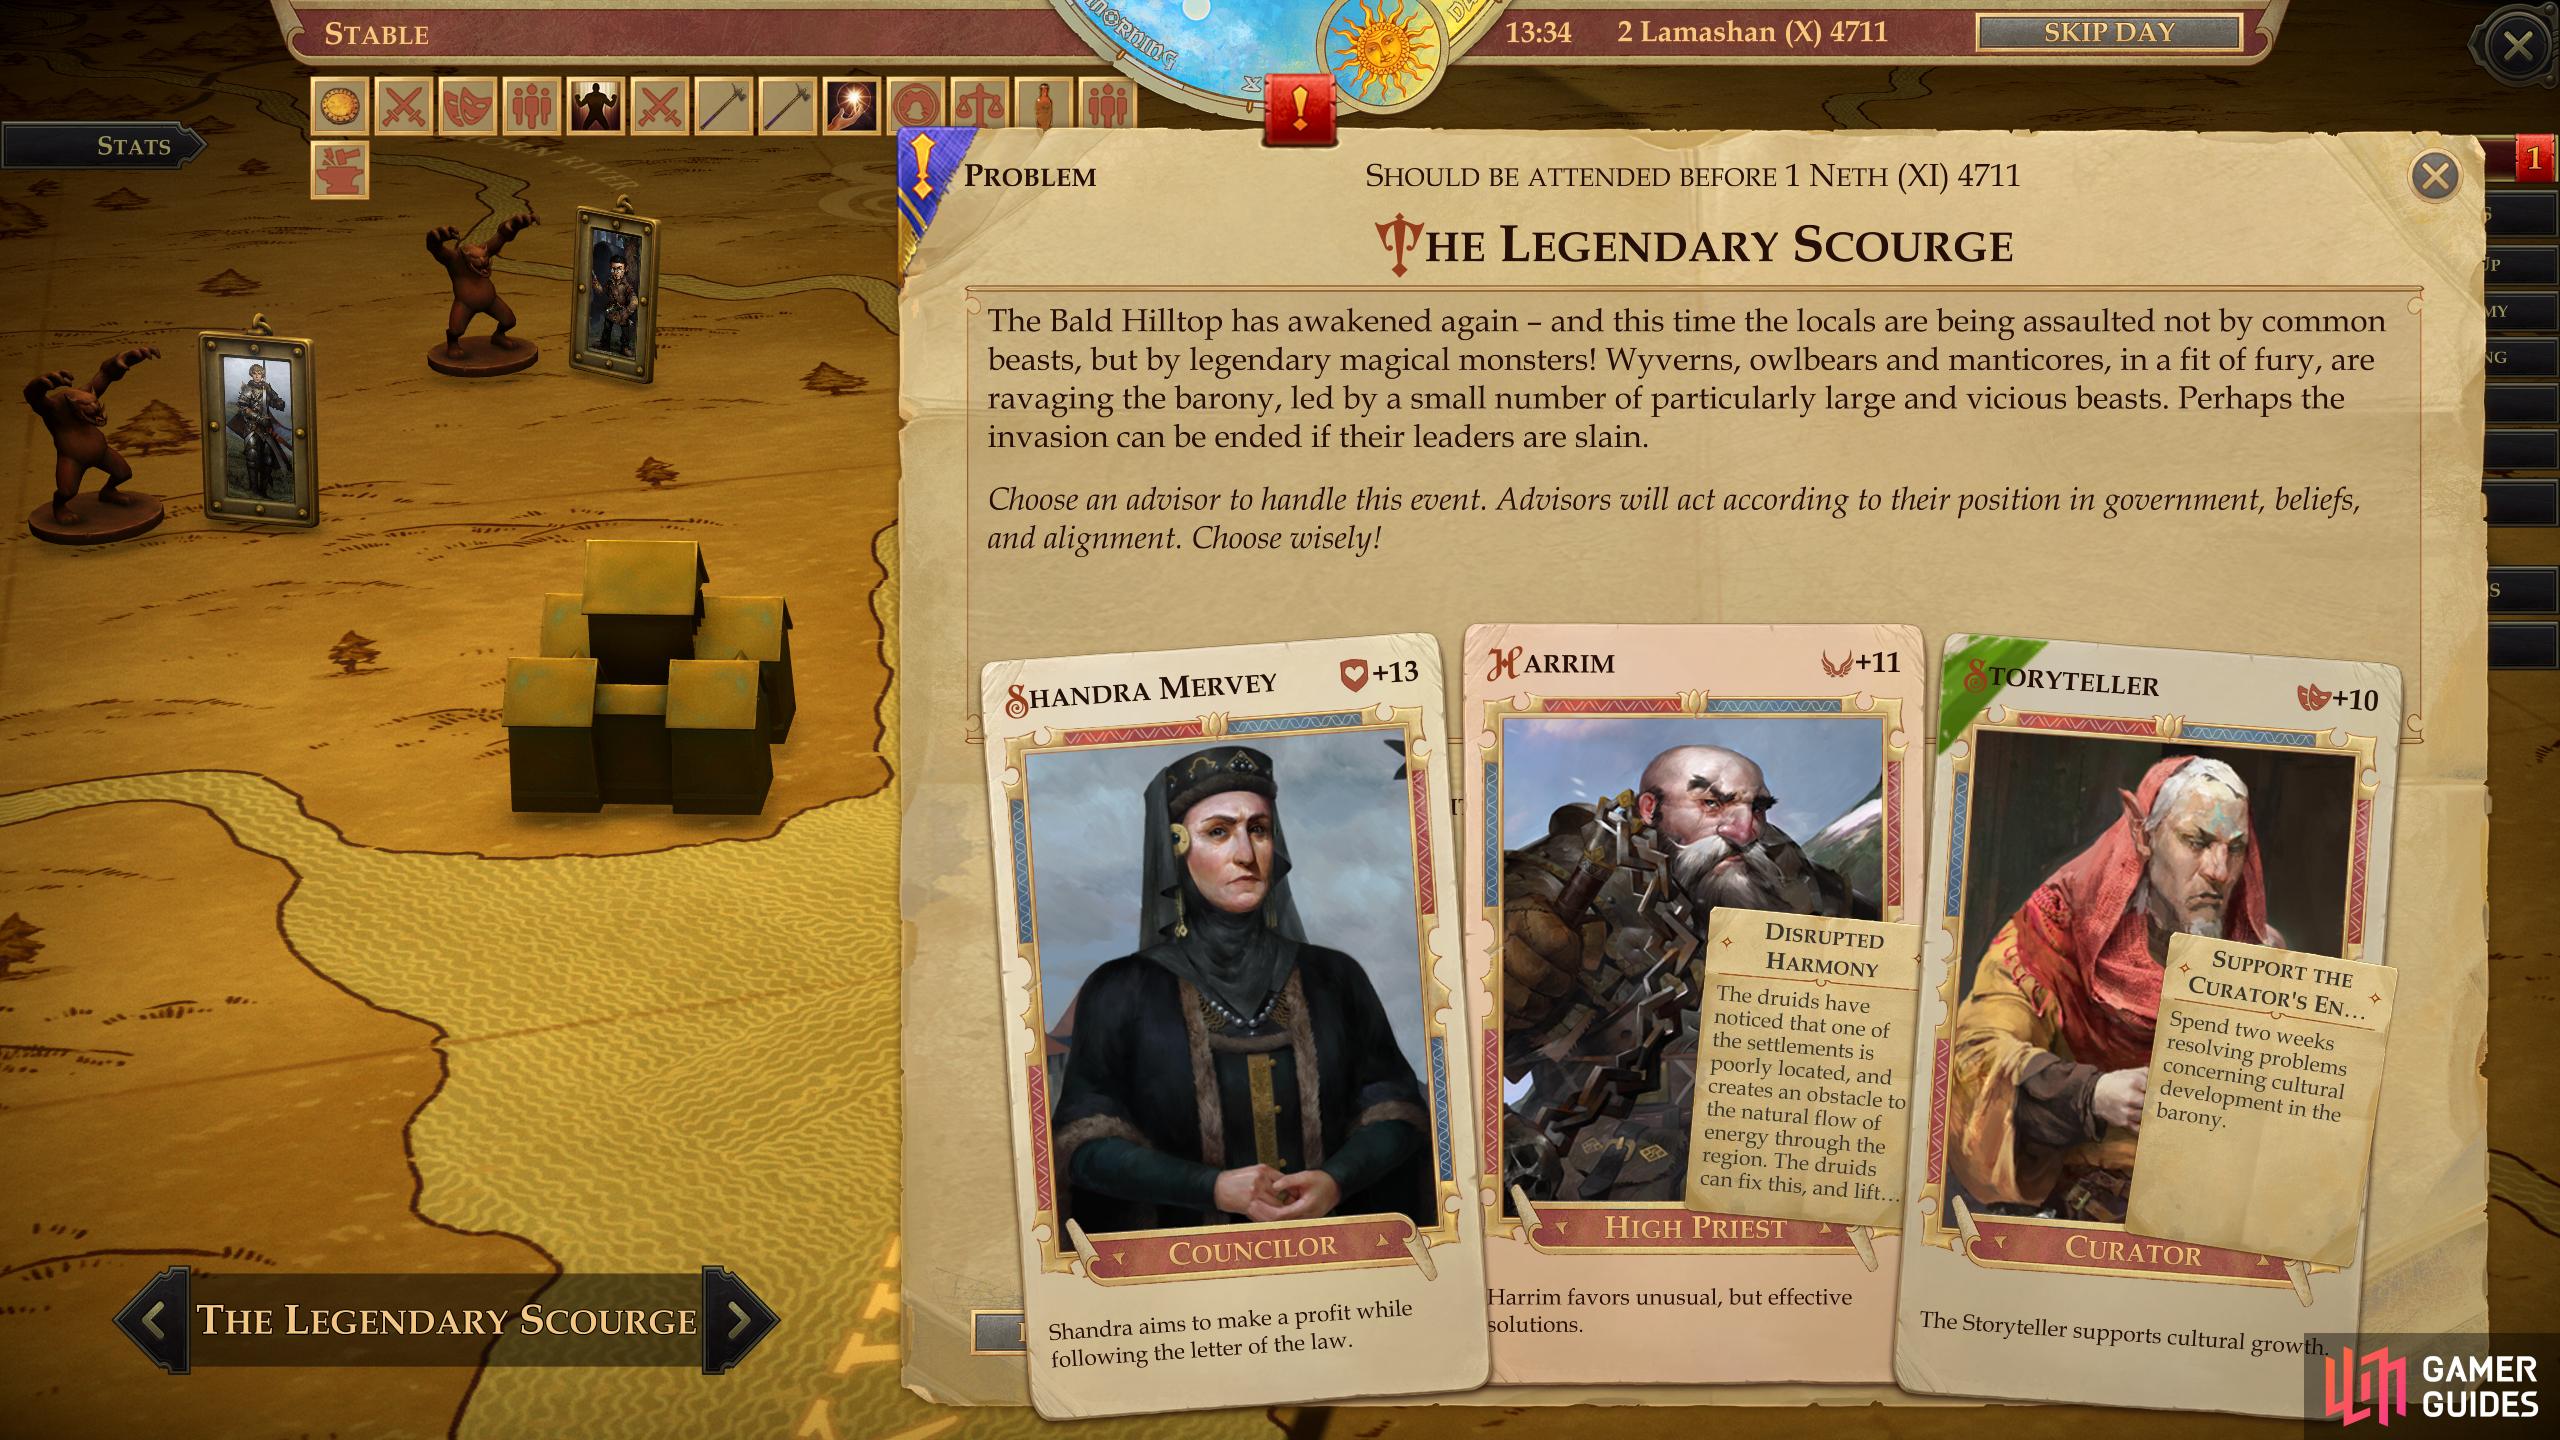 Deal with “The Legendary Scourge” as quickly as possible to avoid Kingdom Stat loss.